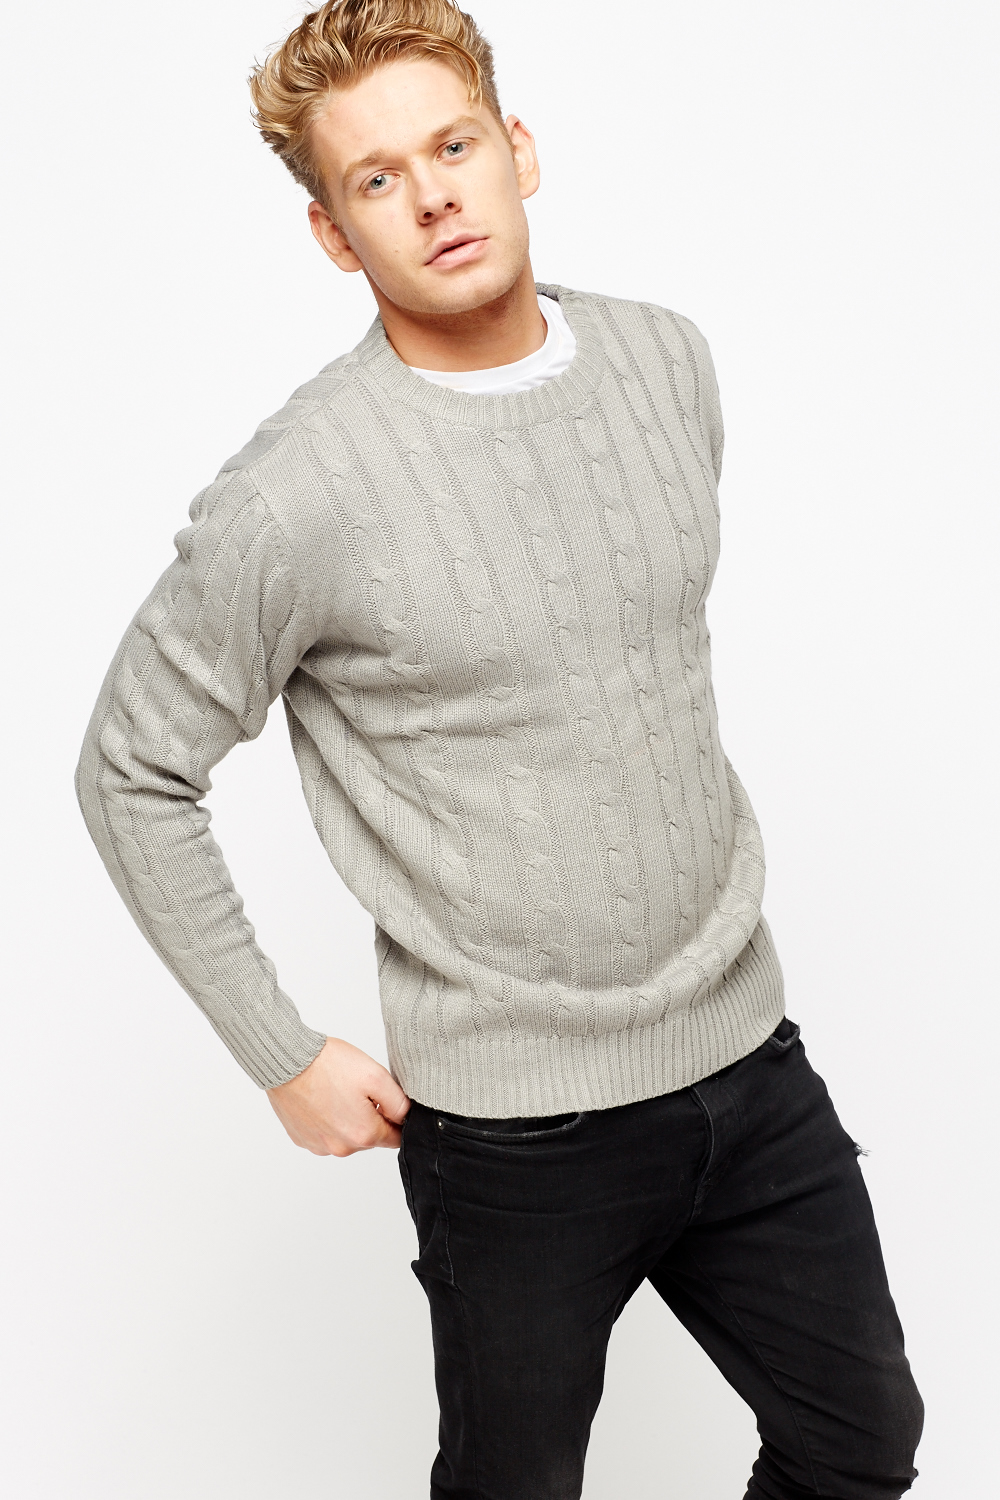 Cable Knit Ribbed Mens Jumper - Just £5